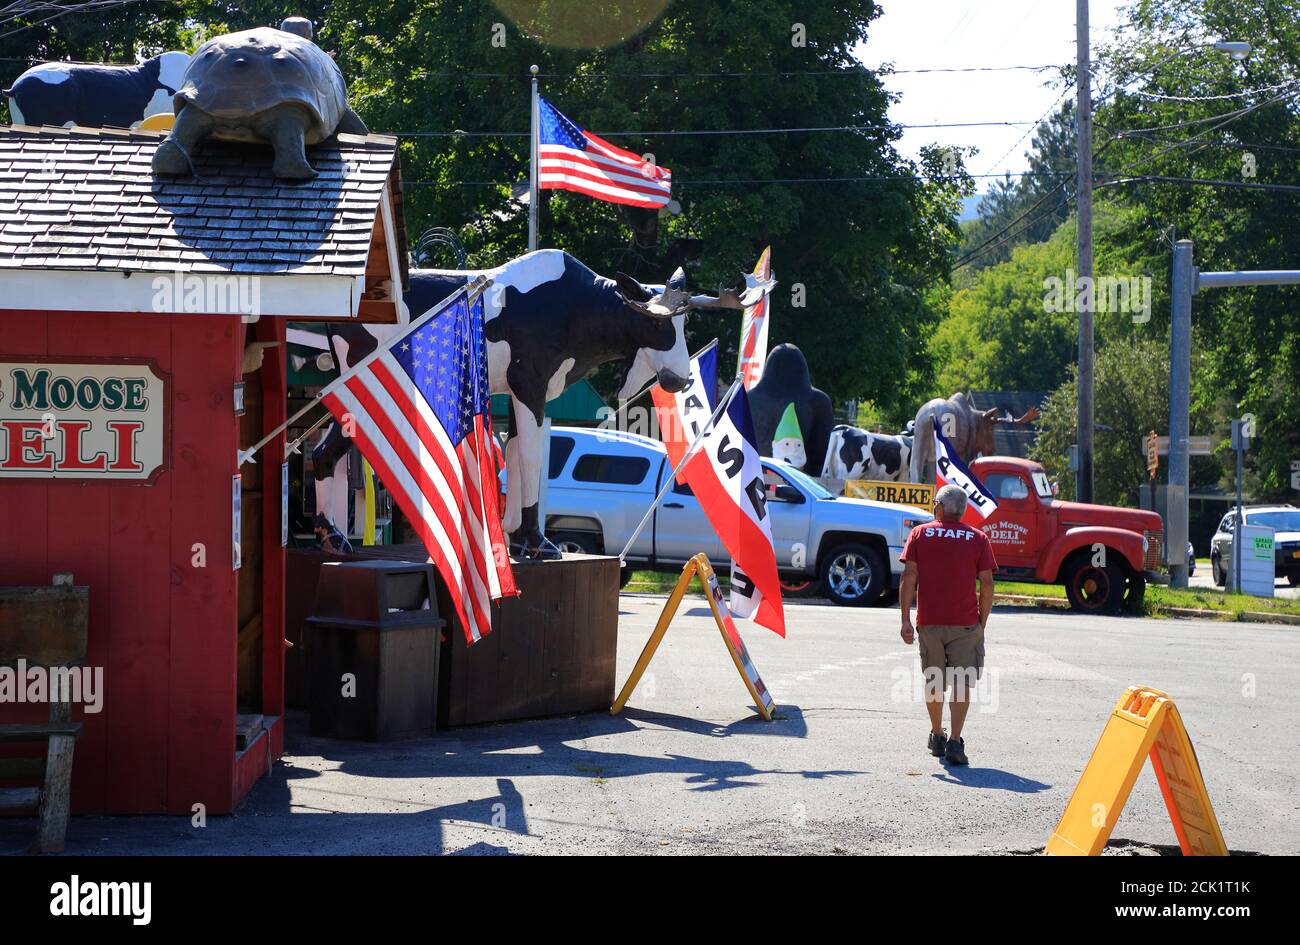 US flags and animal sculptures decorated Big Moose Deli & Country Store.Hoosick.New York.USA Stock Photo